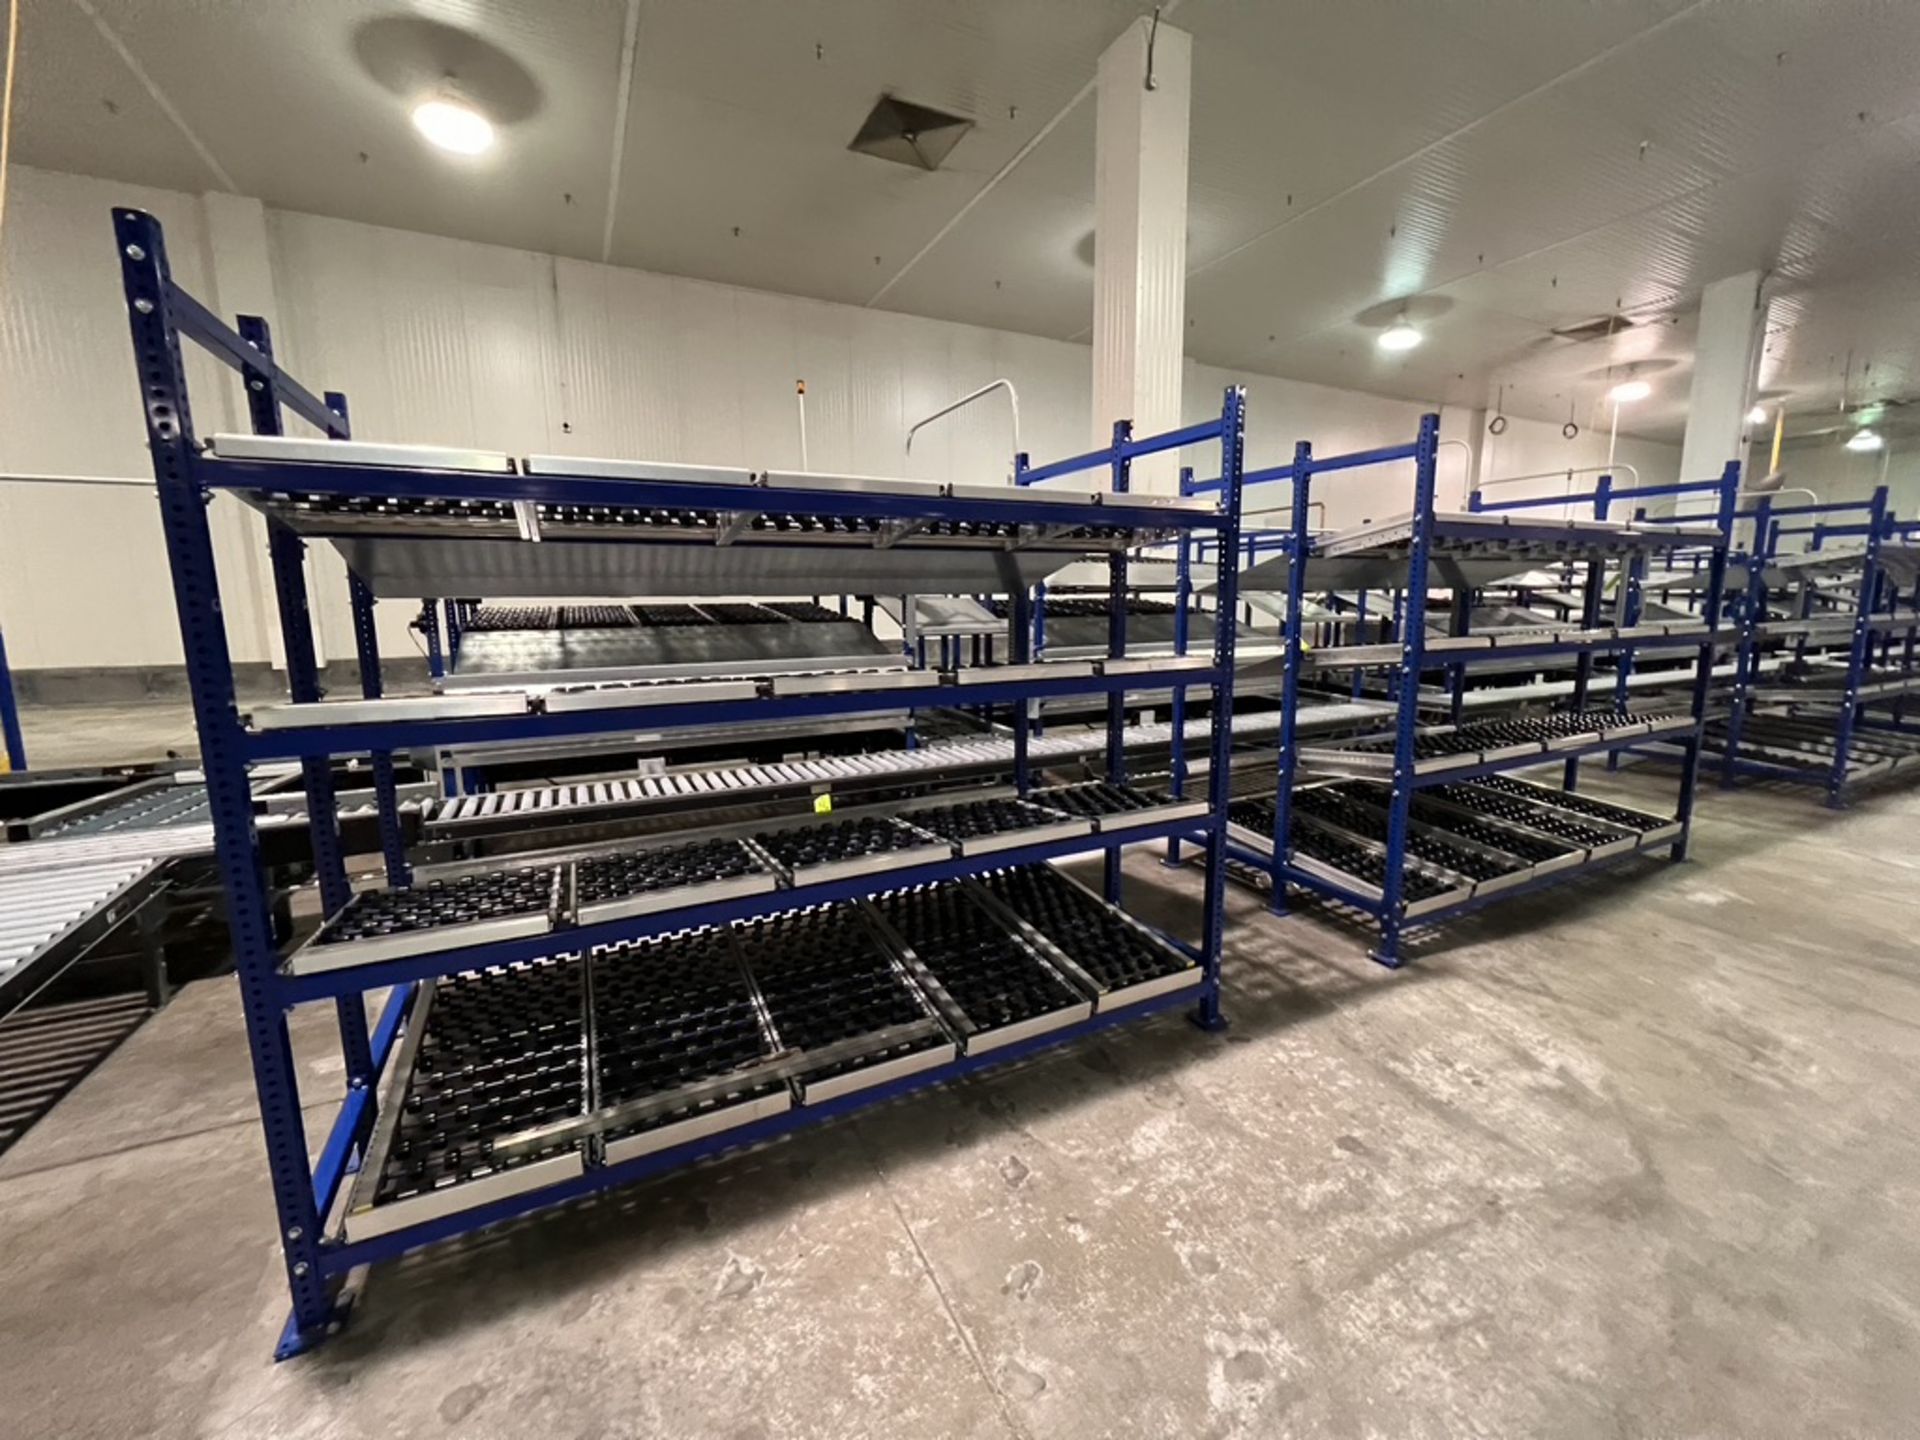 (4) UNEX SPAN TRACK PRODUCT PACK-OFF RACKS, WITH ROLLER CONVEYOR (SUBJECT TO BULK BID IN LOT 11A) - Image 5 of 6